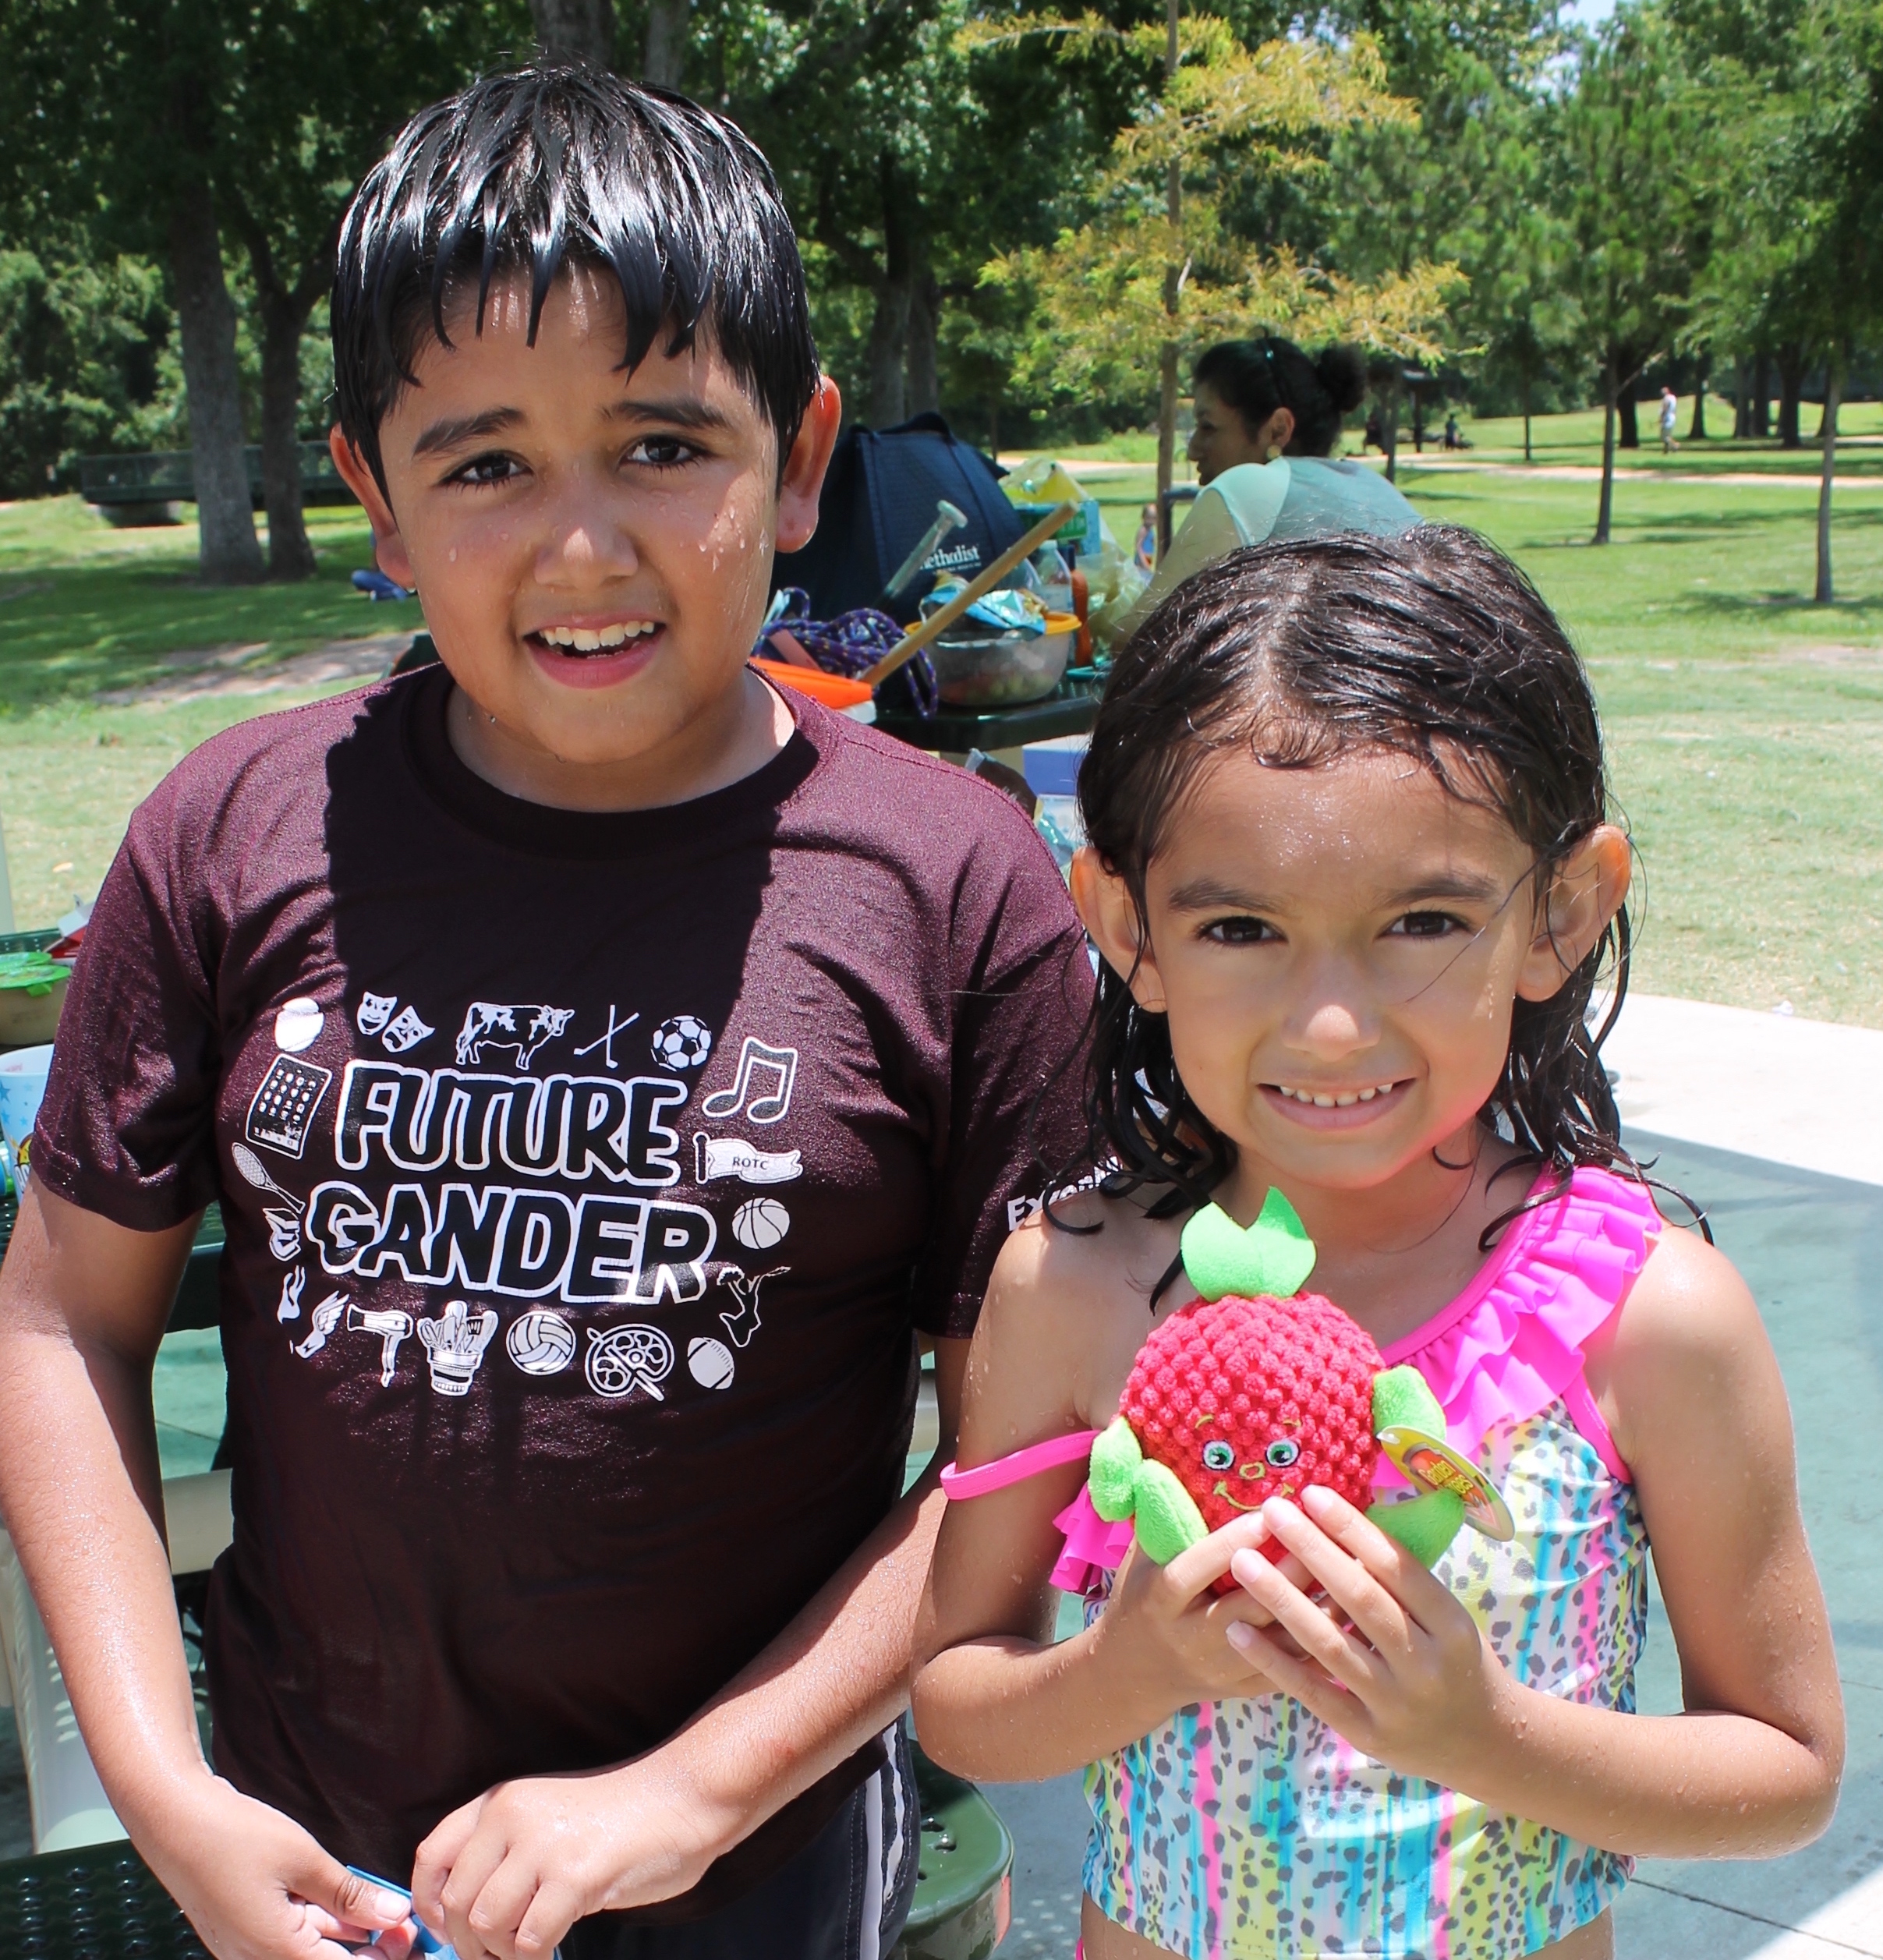  Cousins Alfredo Vega, 8, and Sofia Vega, 6, both won raffle prizes at the Summer Meals cookout at Jenkins Park June 15. The Summer Meals program provides nutritious meals for children ages 1-18. For more information, go to http://www.gccisd.net/page/FoodServices.SummerMeals.
